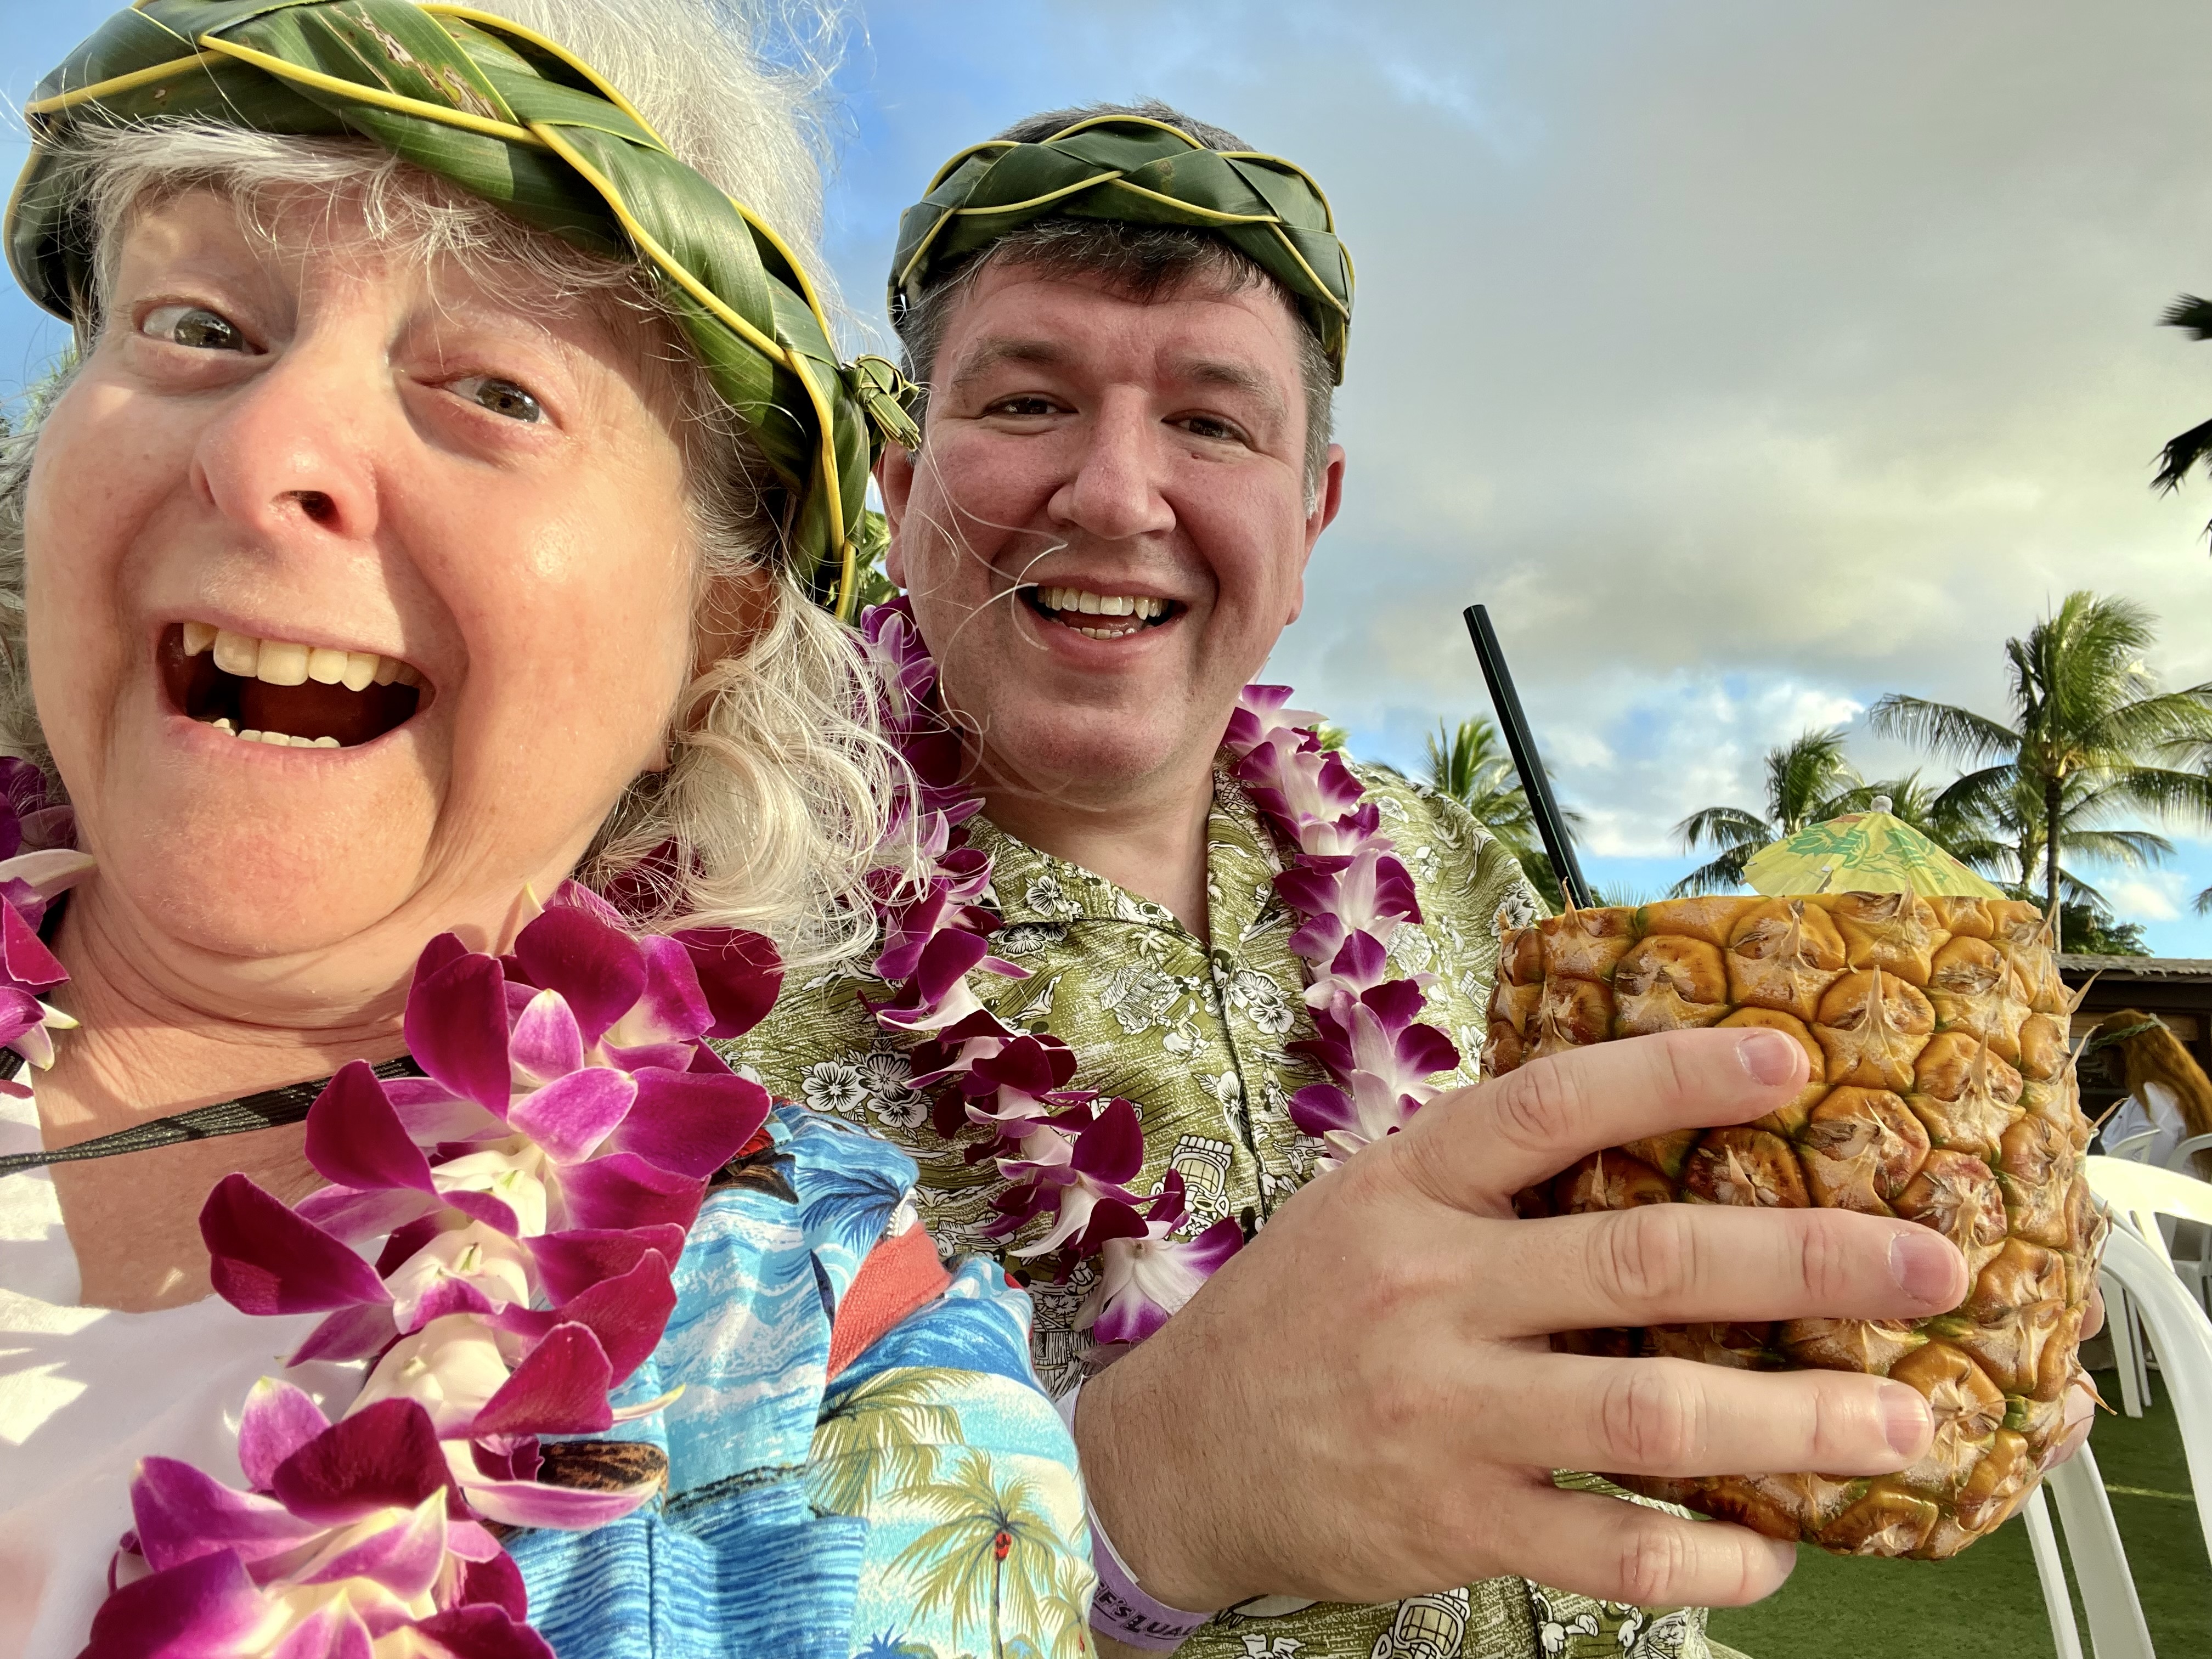 a man and woman wearing leis and holding a pineapple